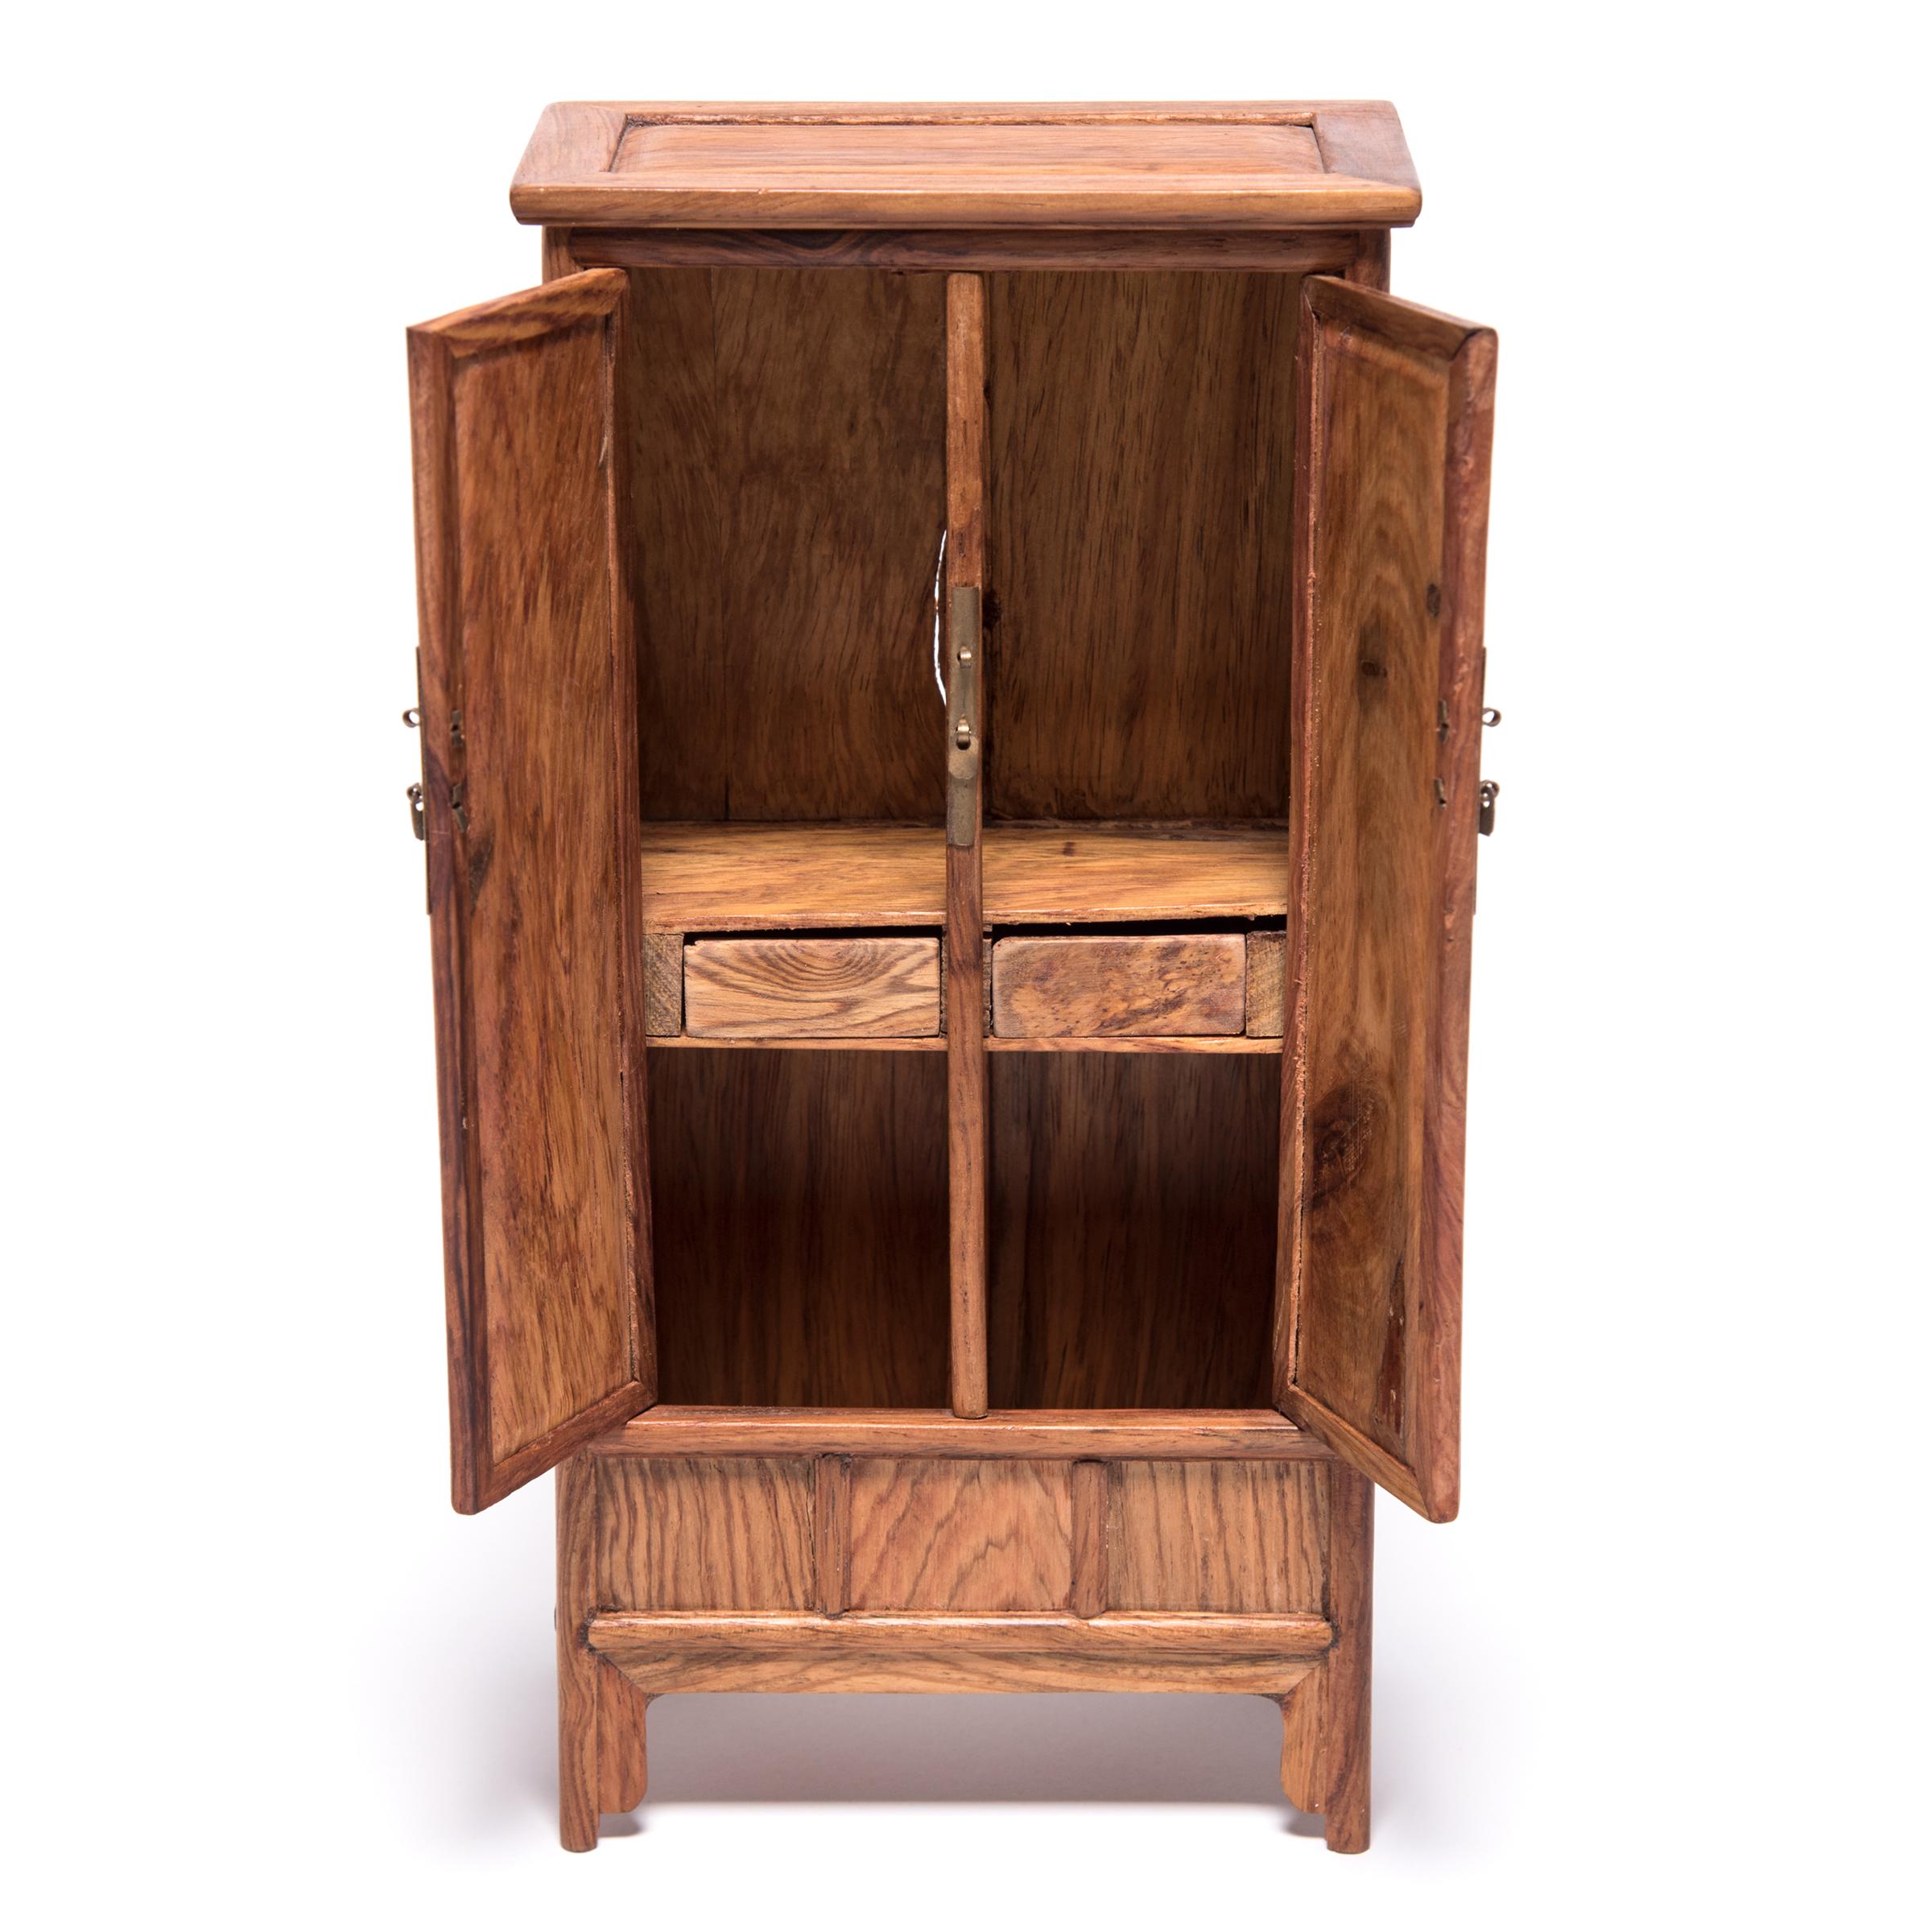 A full size cabinet with this level of workmanship would be an incredible find, but this beautiful piece of furniture—at only nine inches tall—is perfectly constructed down to the tiniest minutia. The cabinet was made in Northern China out of